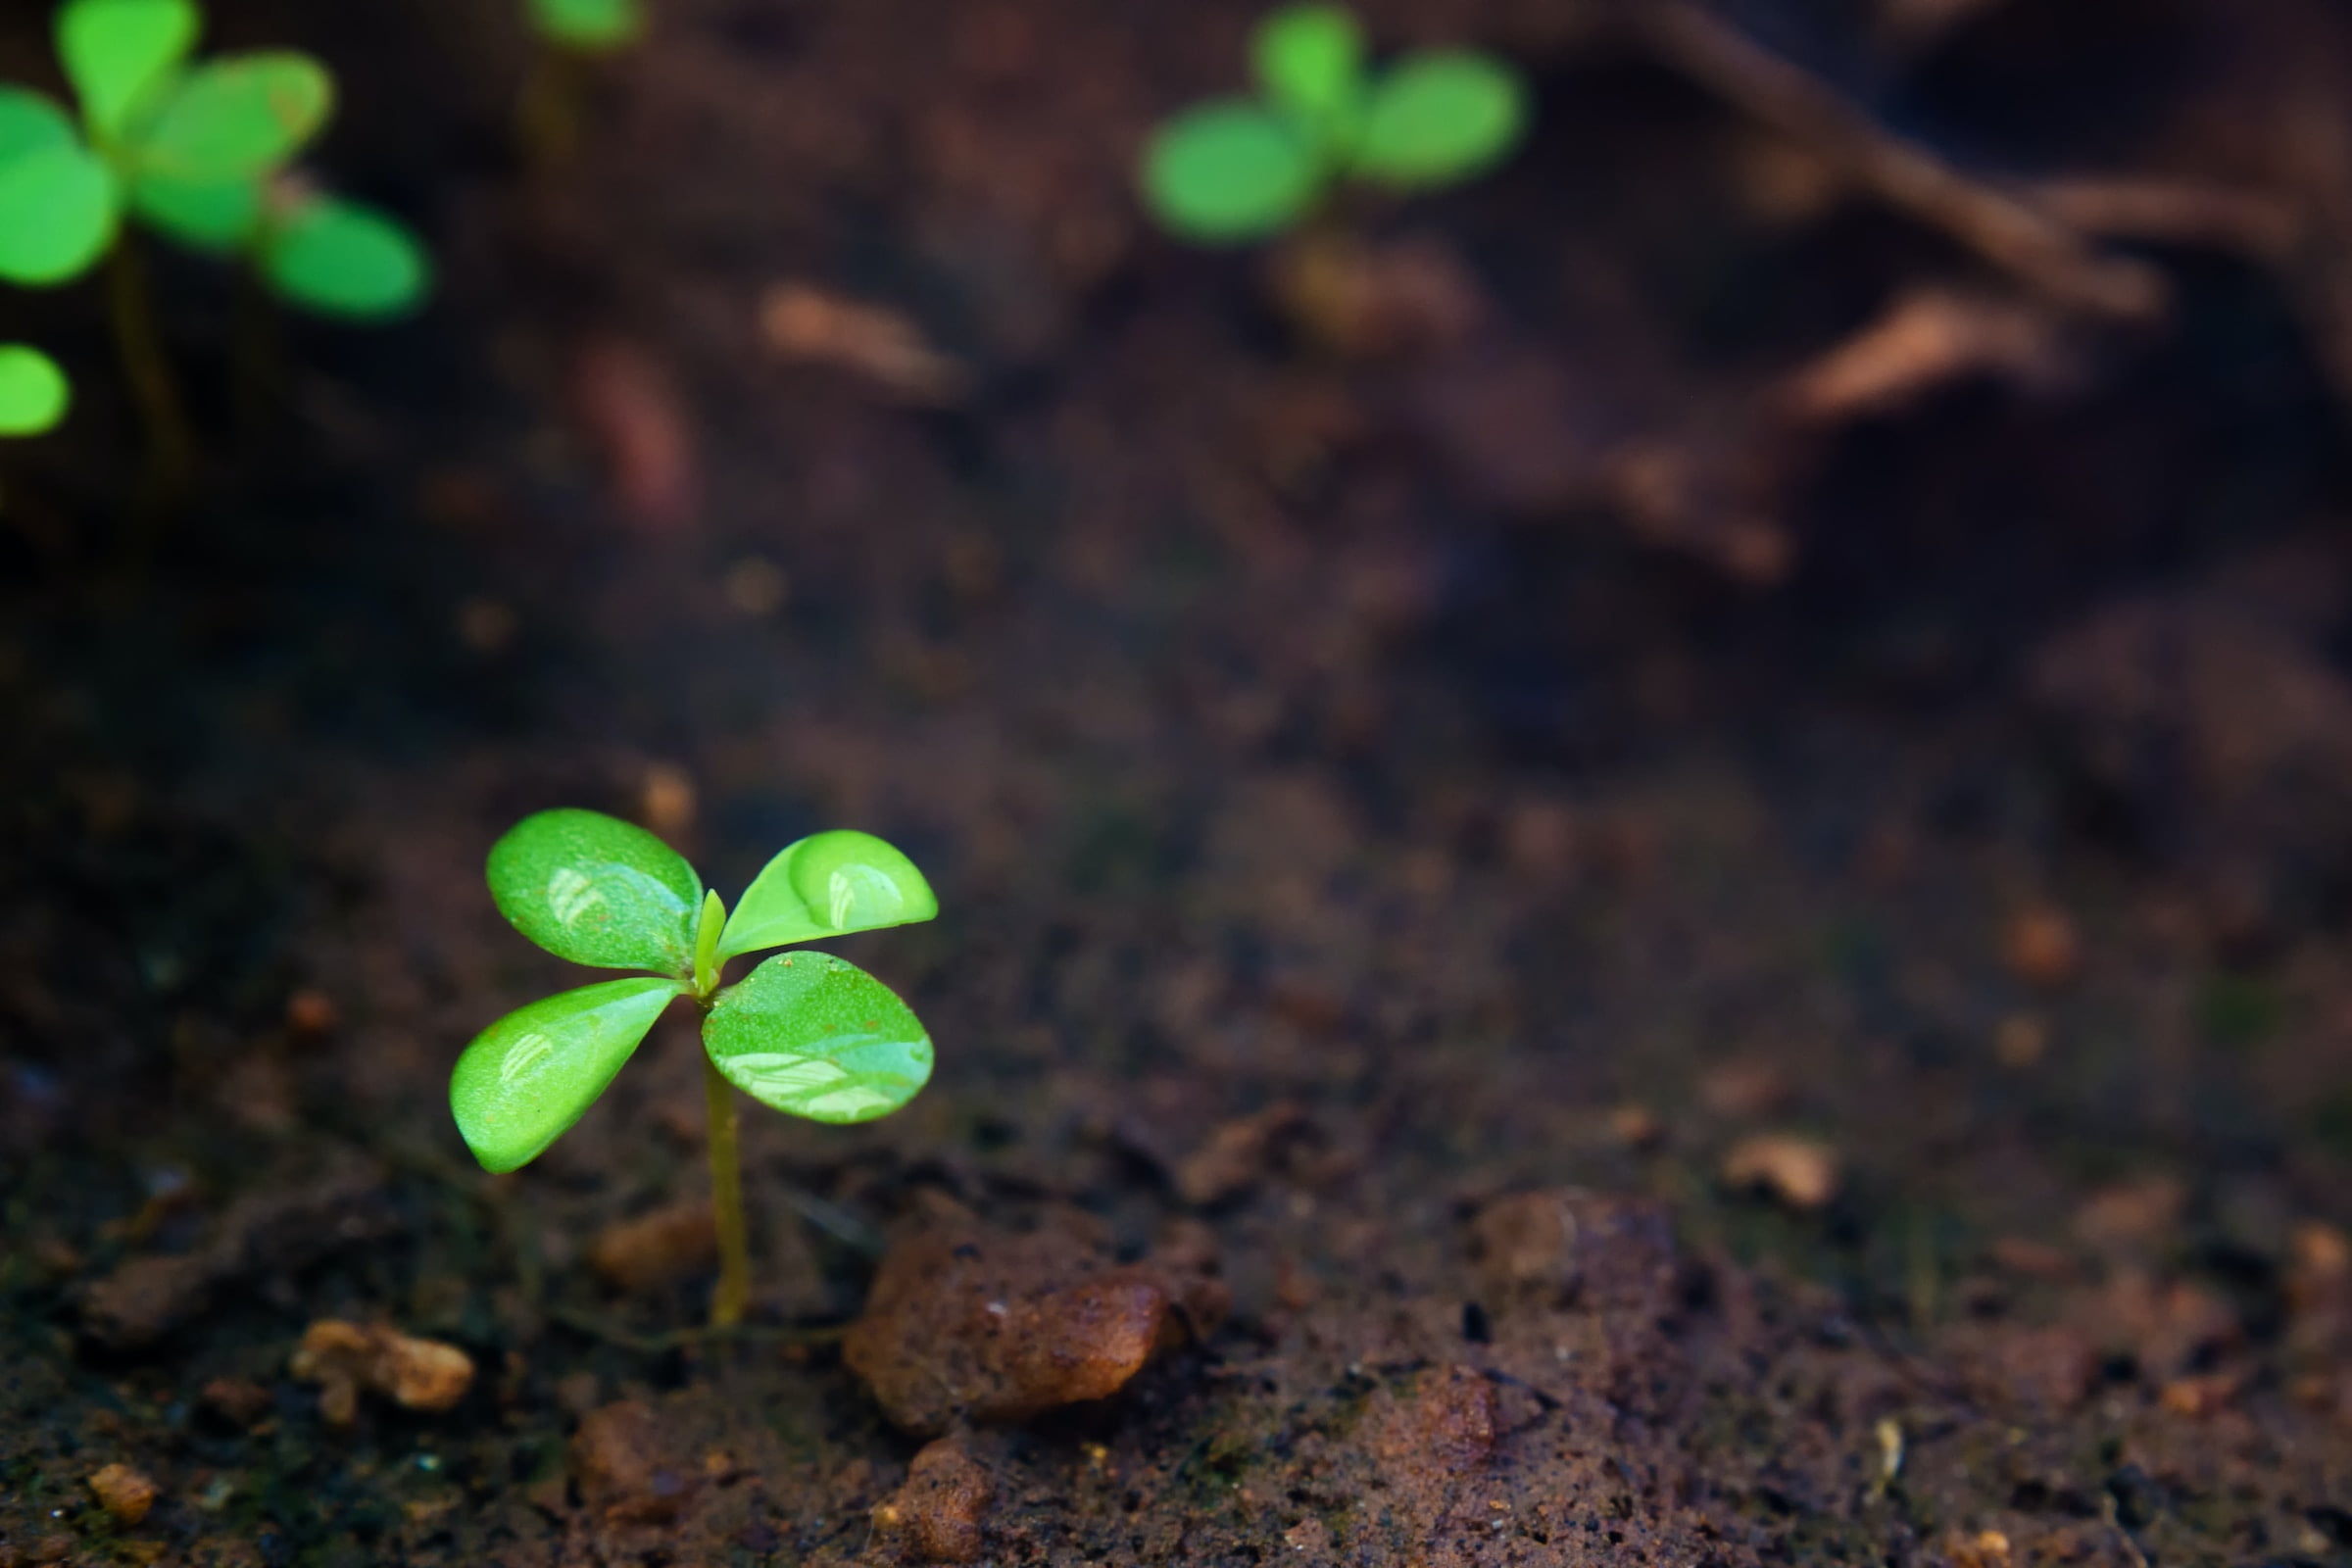 Unearthing the Secrets of Earth's Foundation, a small green plant is growing in the soil.